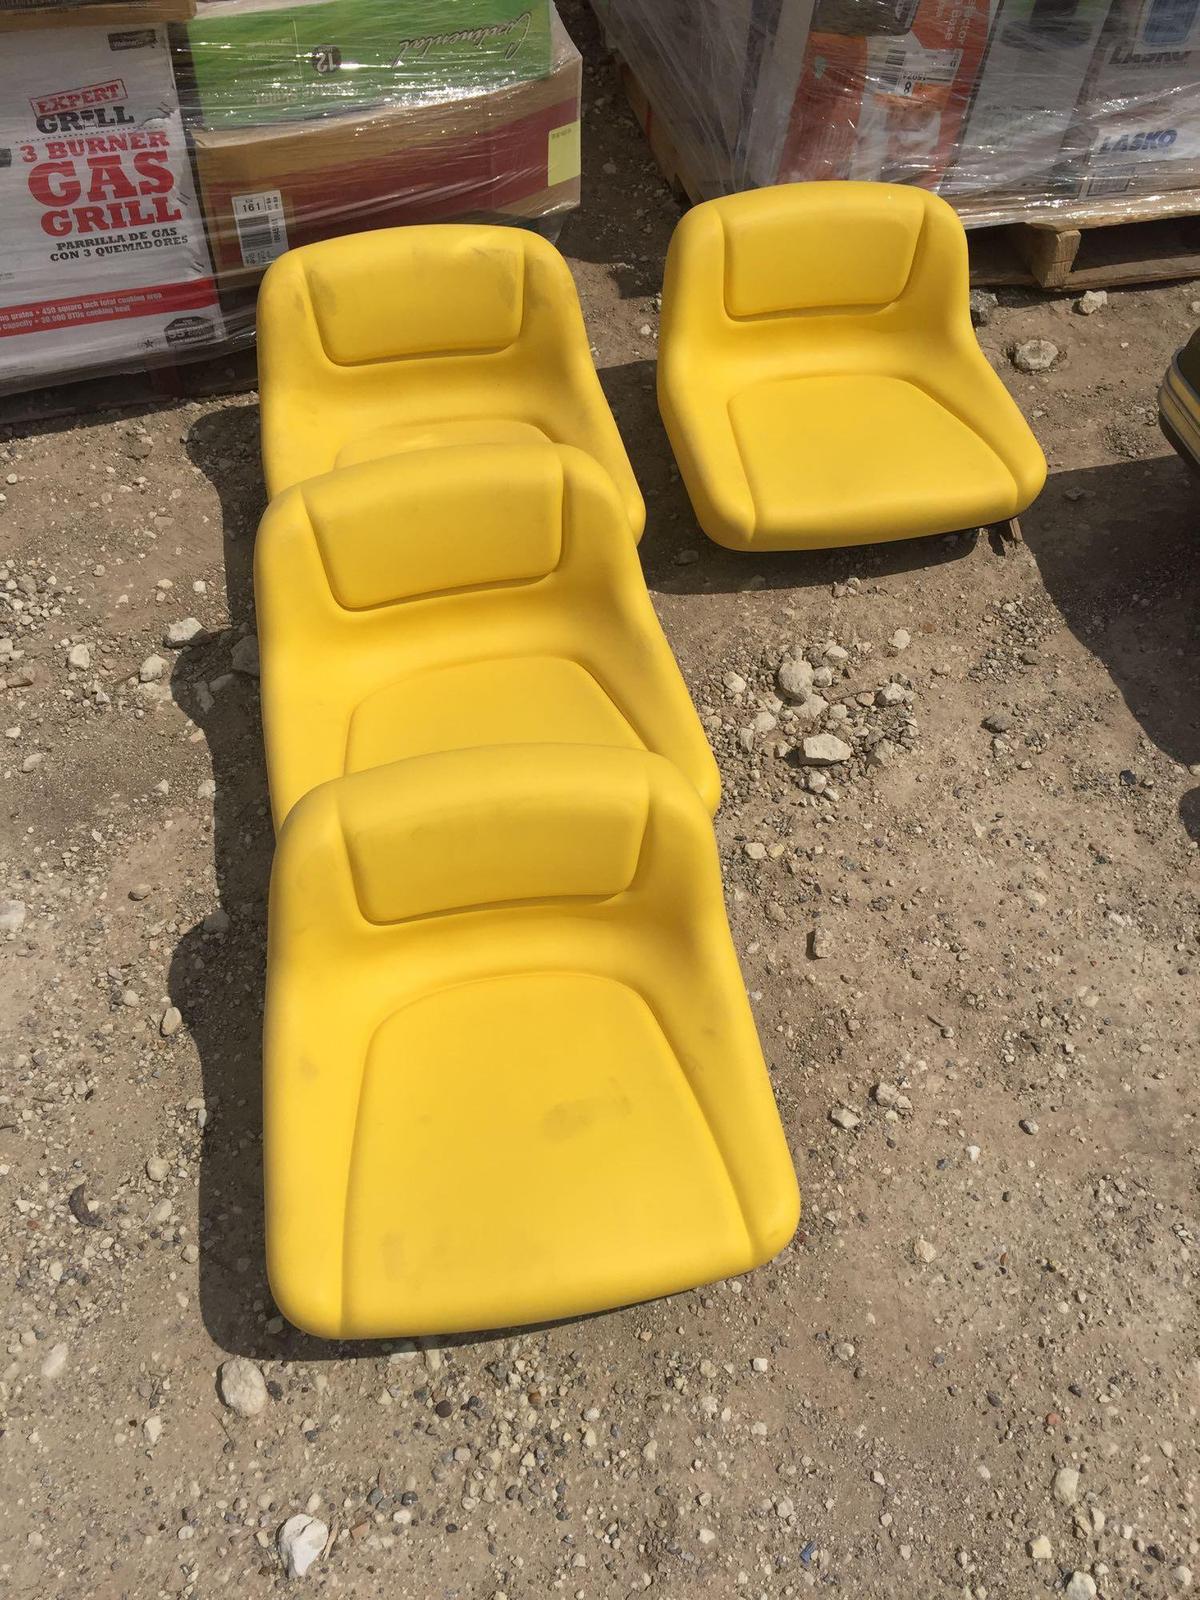 New tractor seats